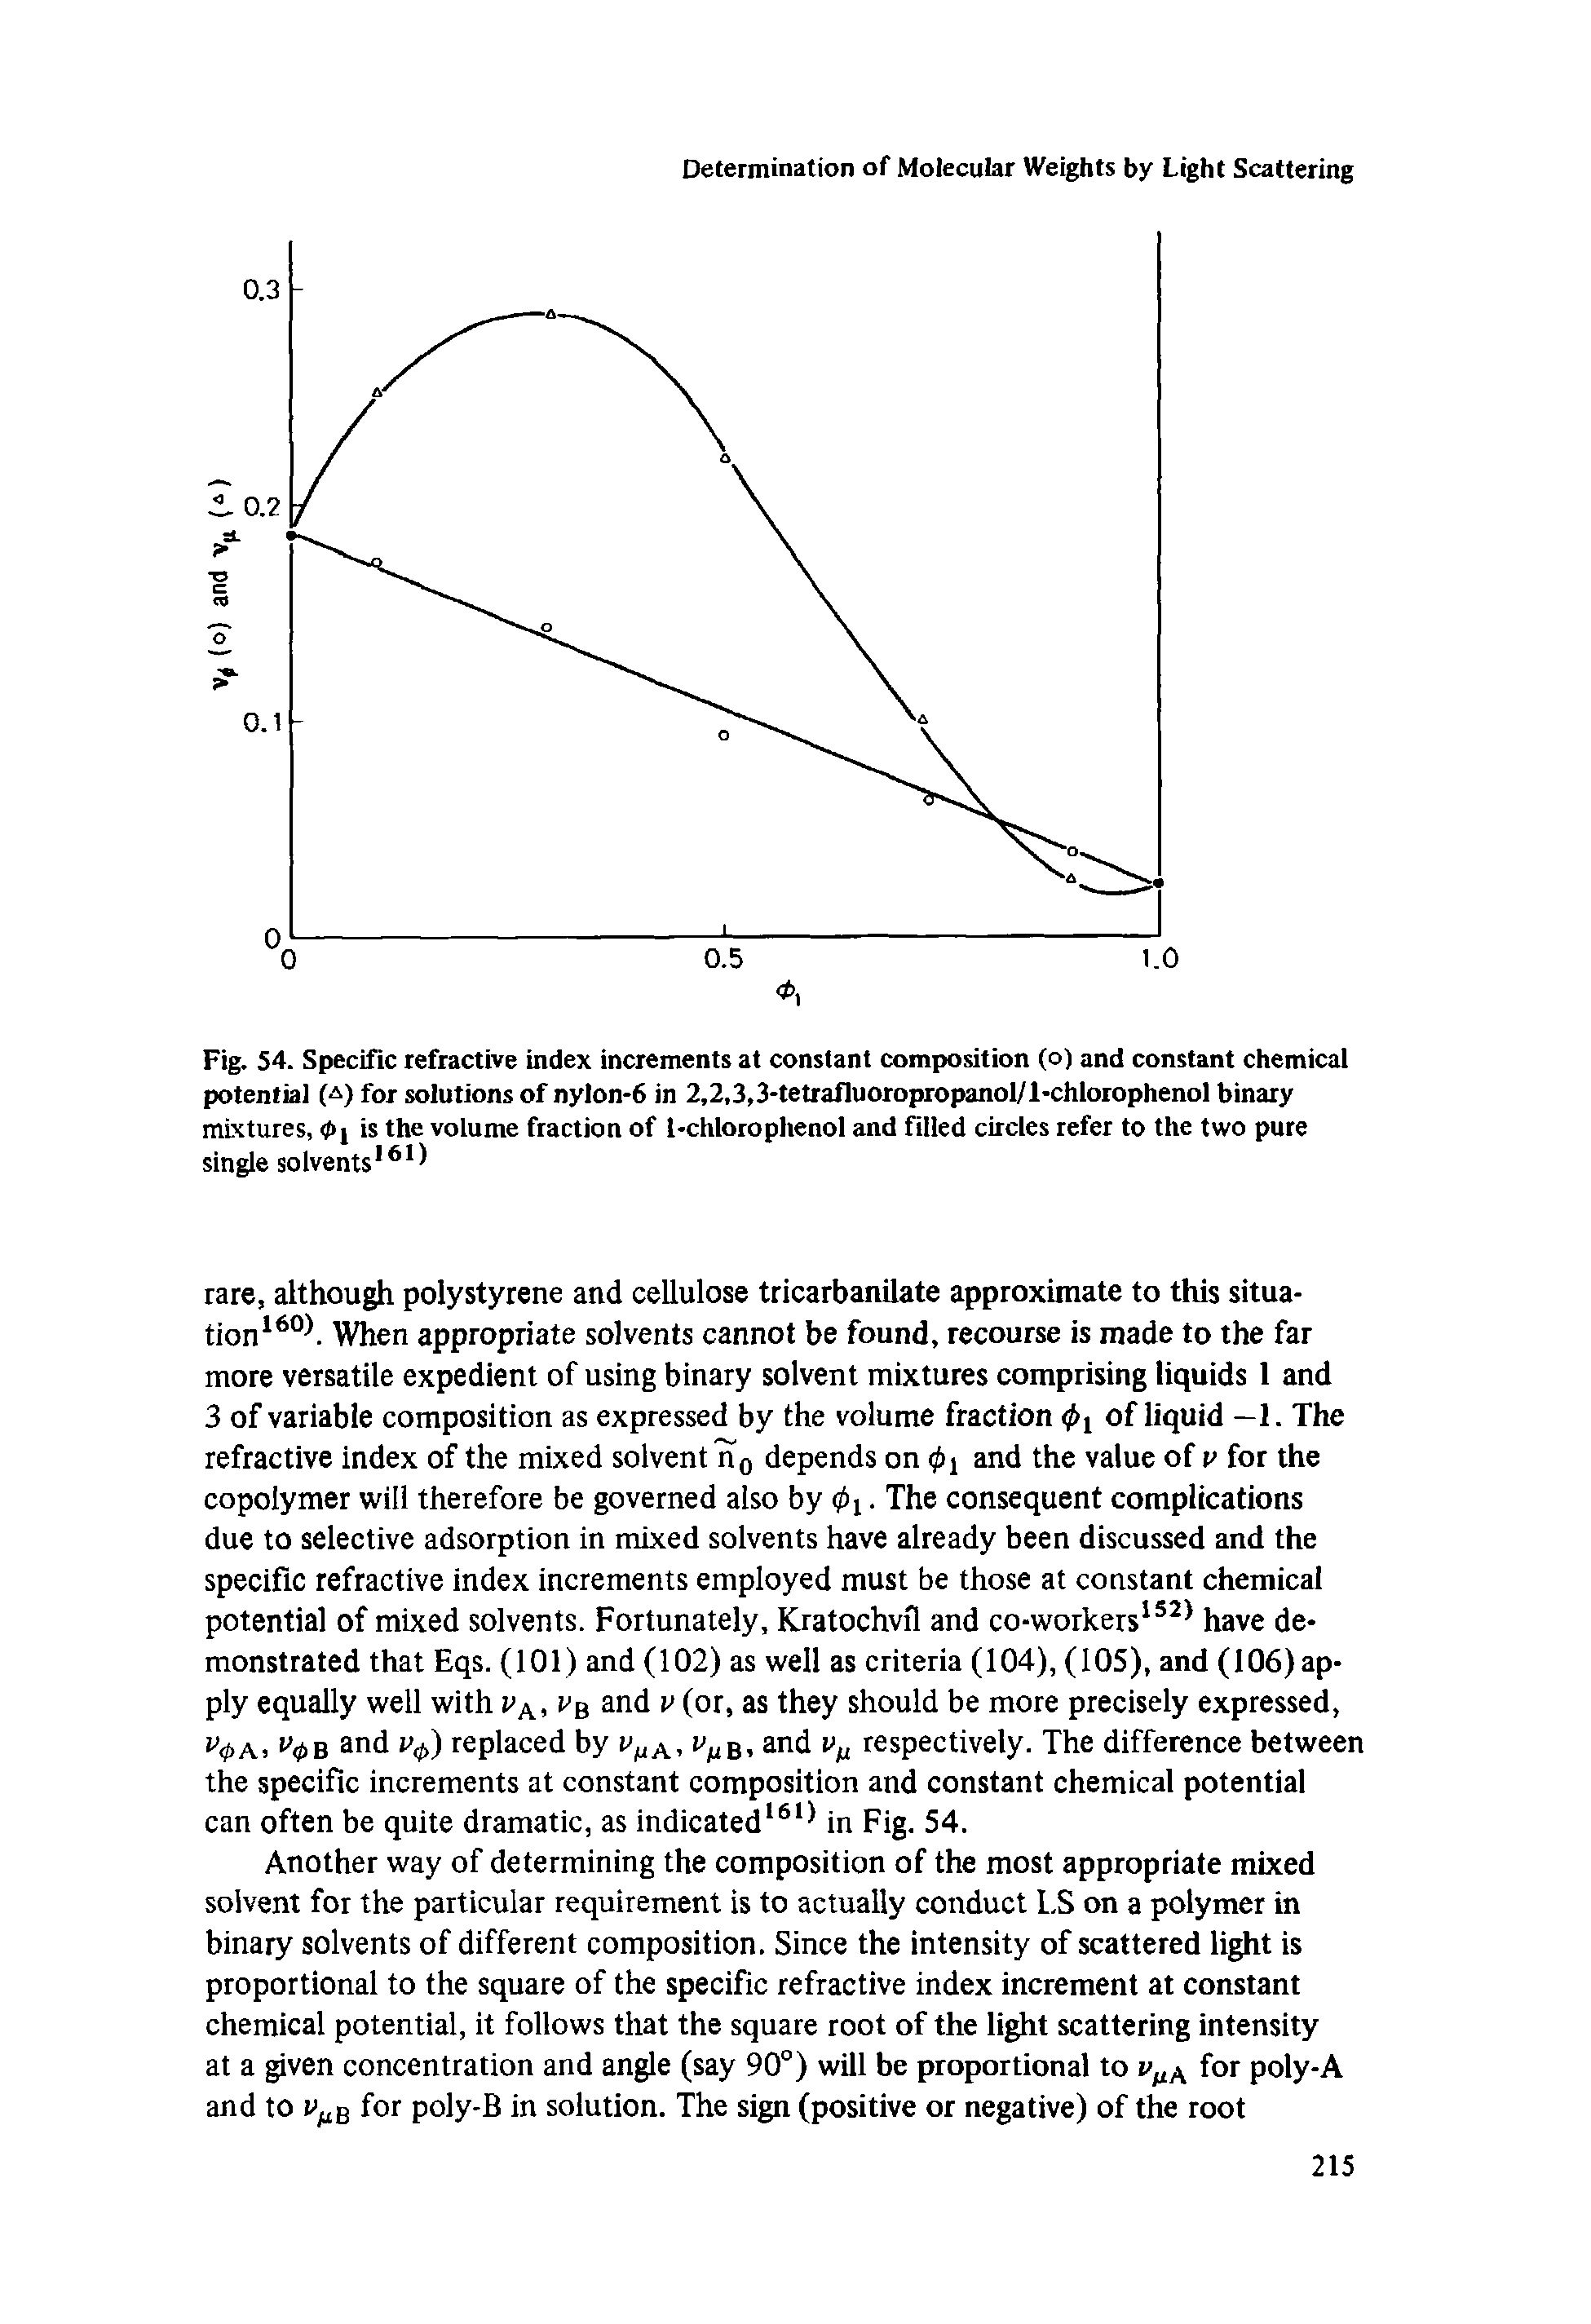 Fig. 54. Specific refractive index increments at constant composition (o) and constant chemical potential ( ) for solutions of nylon-6 in 2,2,3,3-tetrafluoropropanol/l-chlorophenol binary mixtures, is the volume fraction of l-chlorophenol and filled circles refer to the two pure single solvents161)...